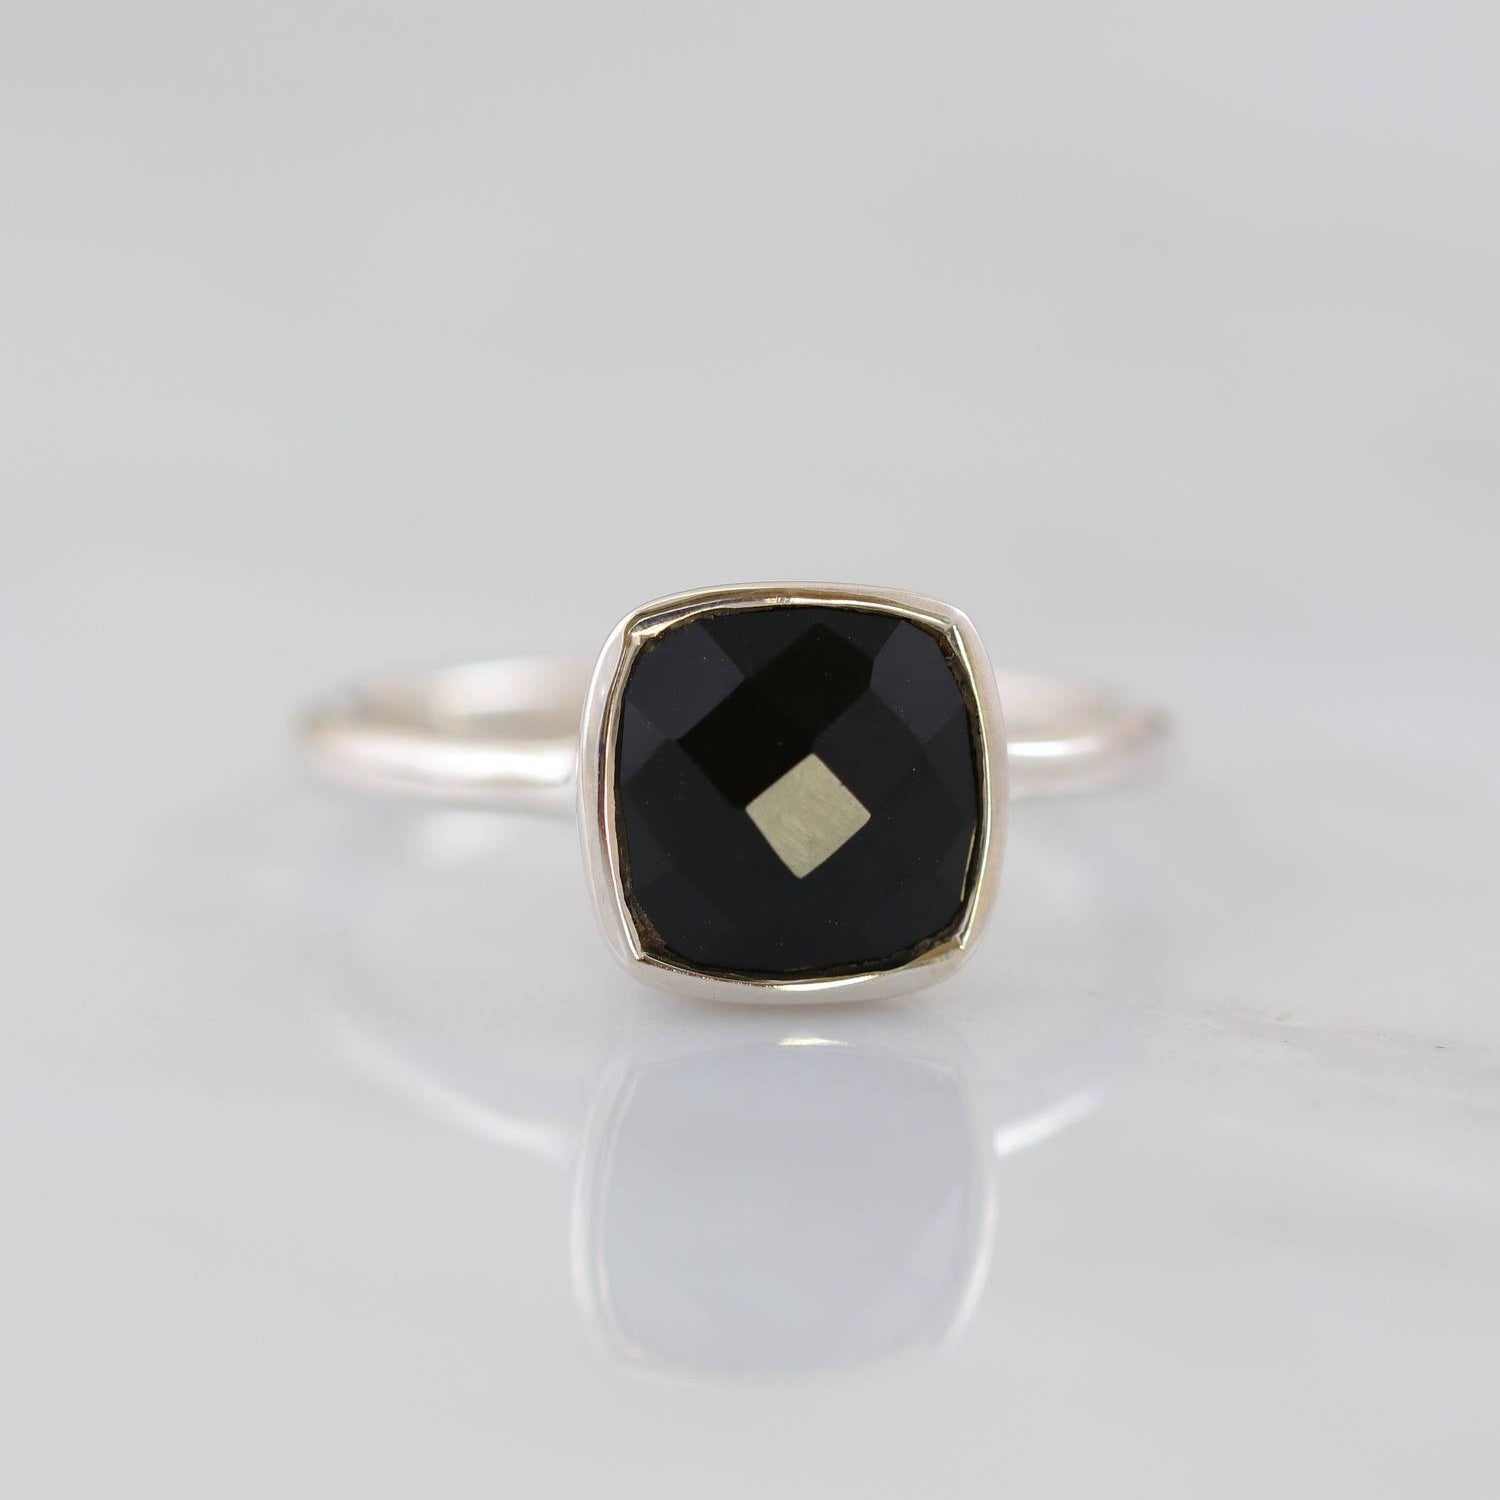 Black onyx Ring, Onyx Ring, Onyx Stackable rings, Stacker Rings, Faceted Gemstone rings, Mother's gifts, Bezel rings, Gold and Silver Rings